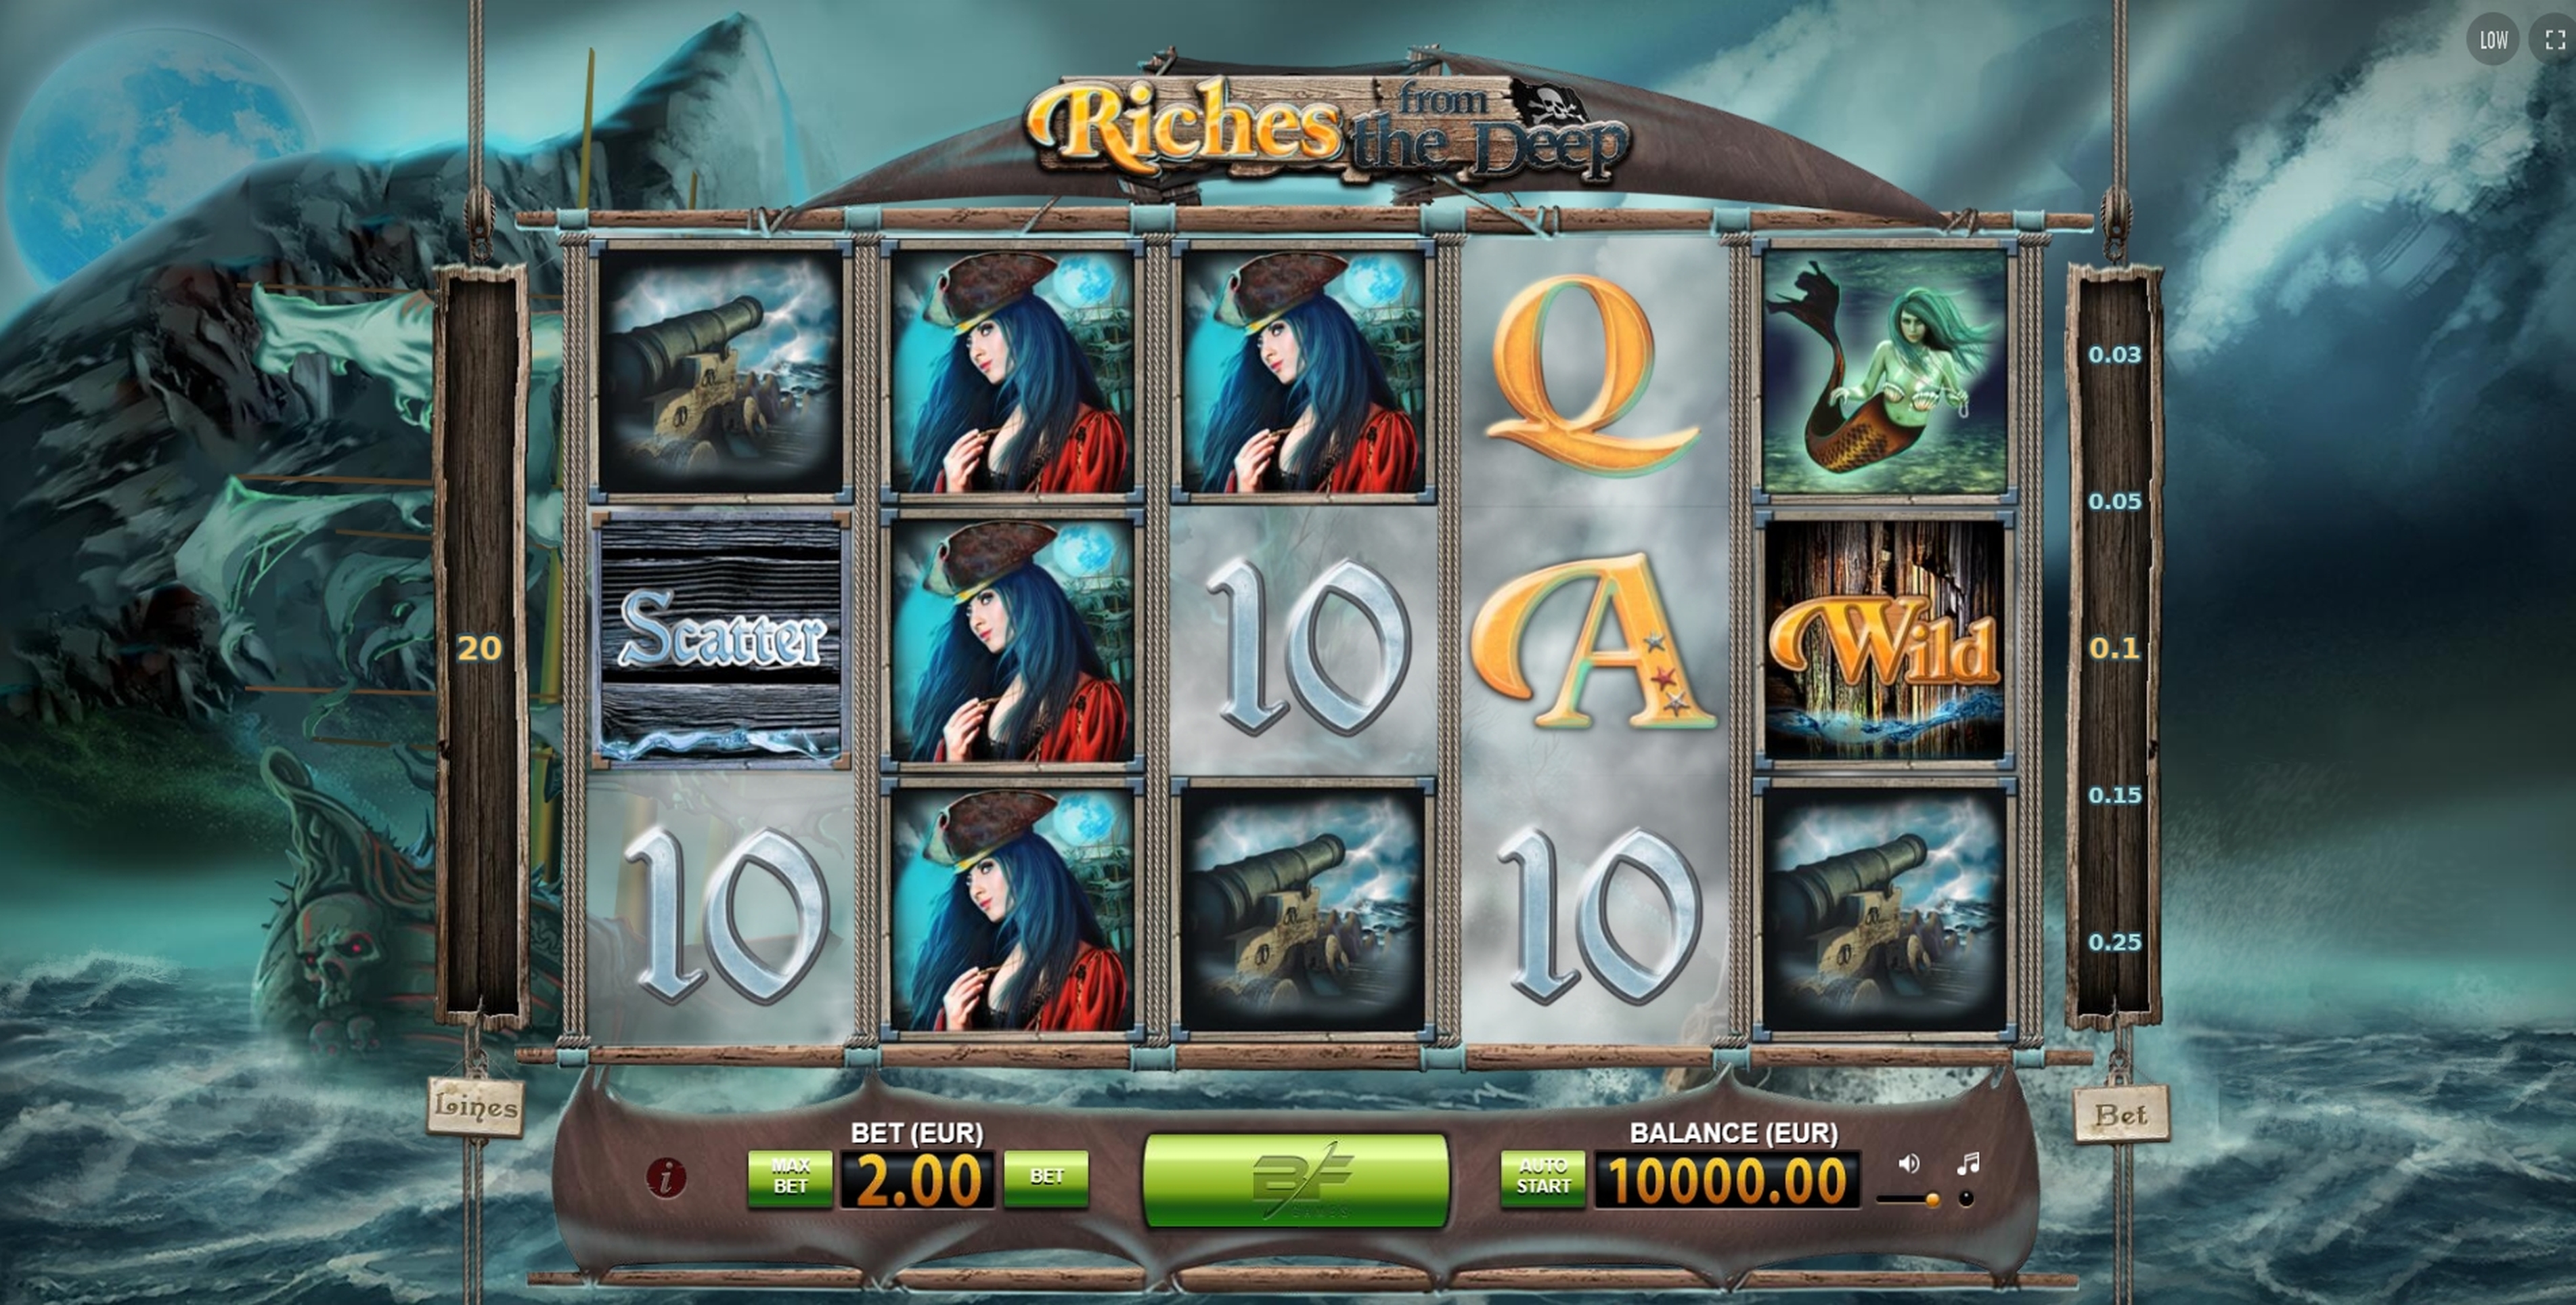 Reels in Riches from the Deep Slot Game by BF Games